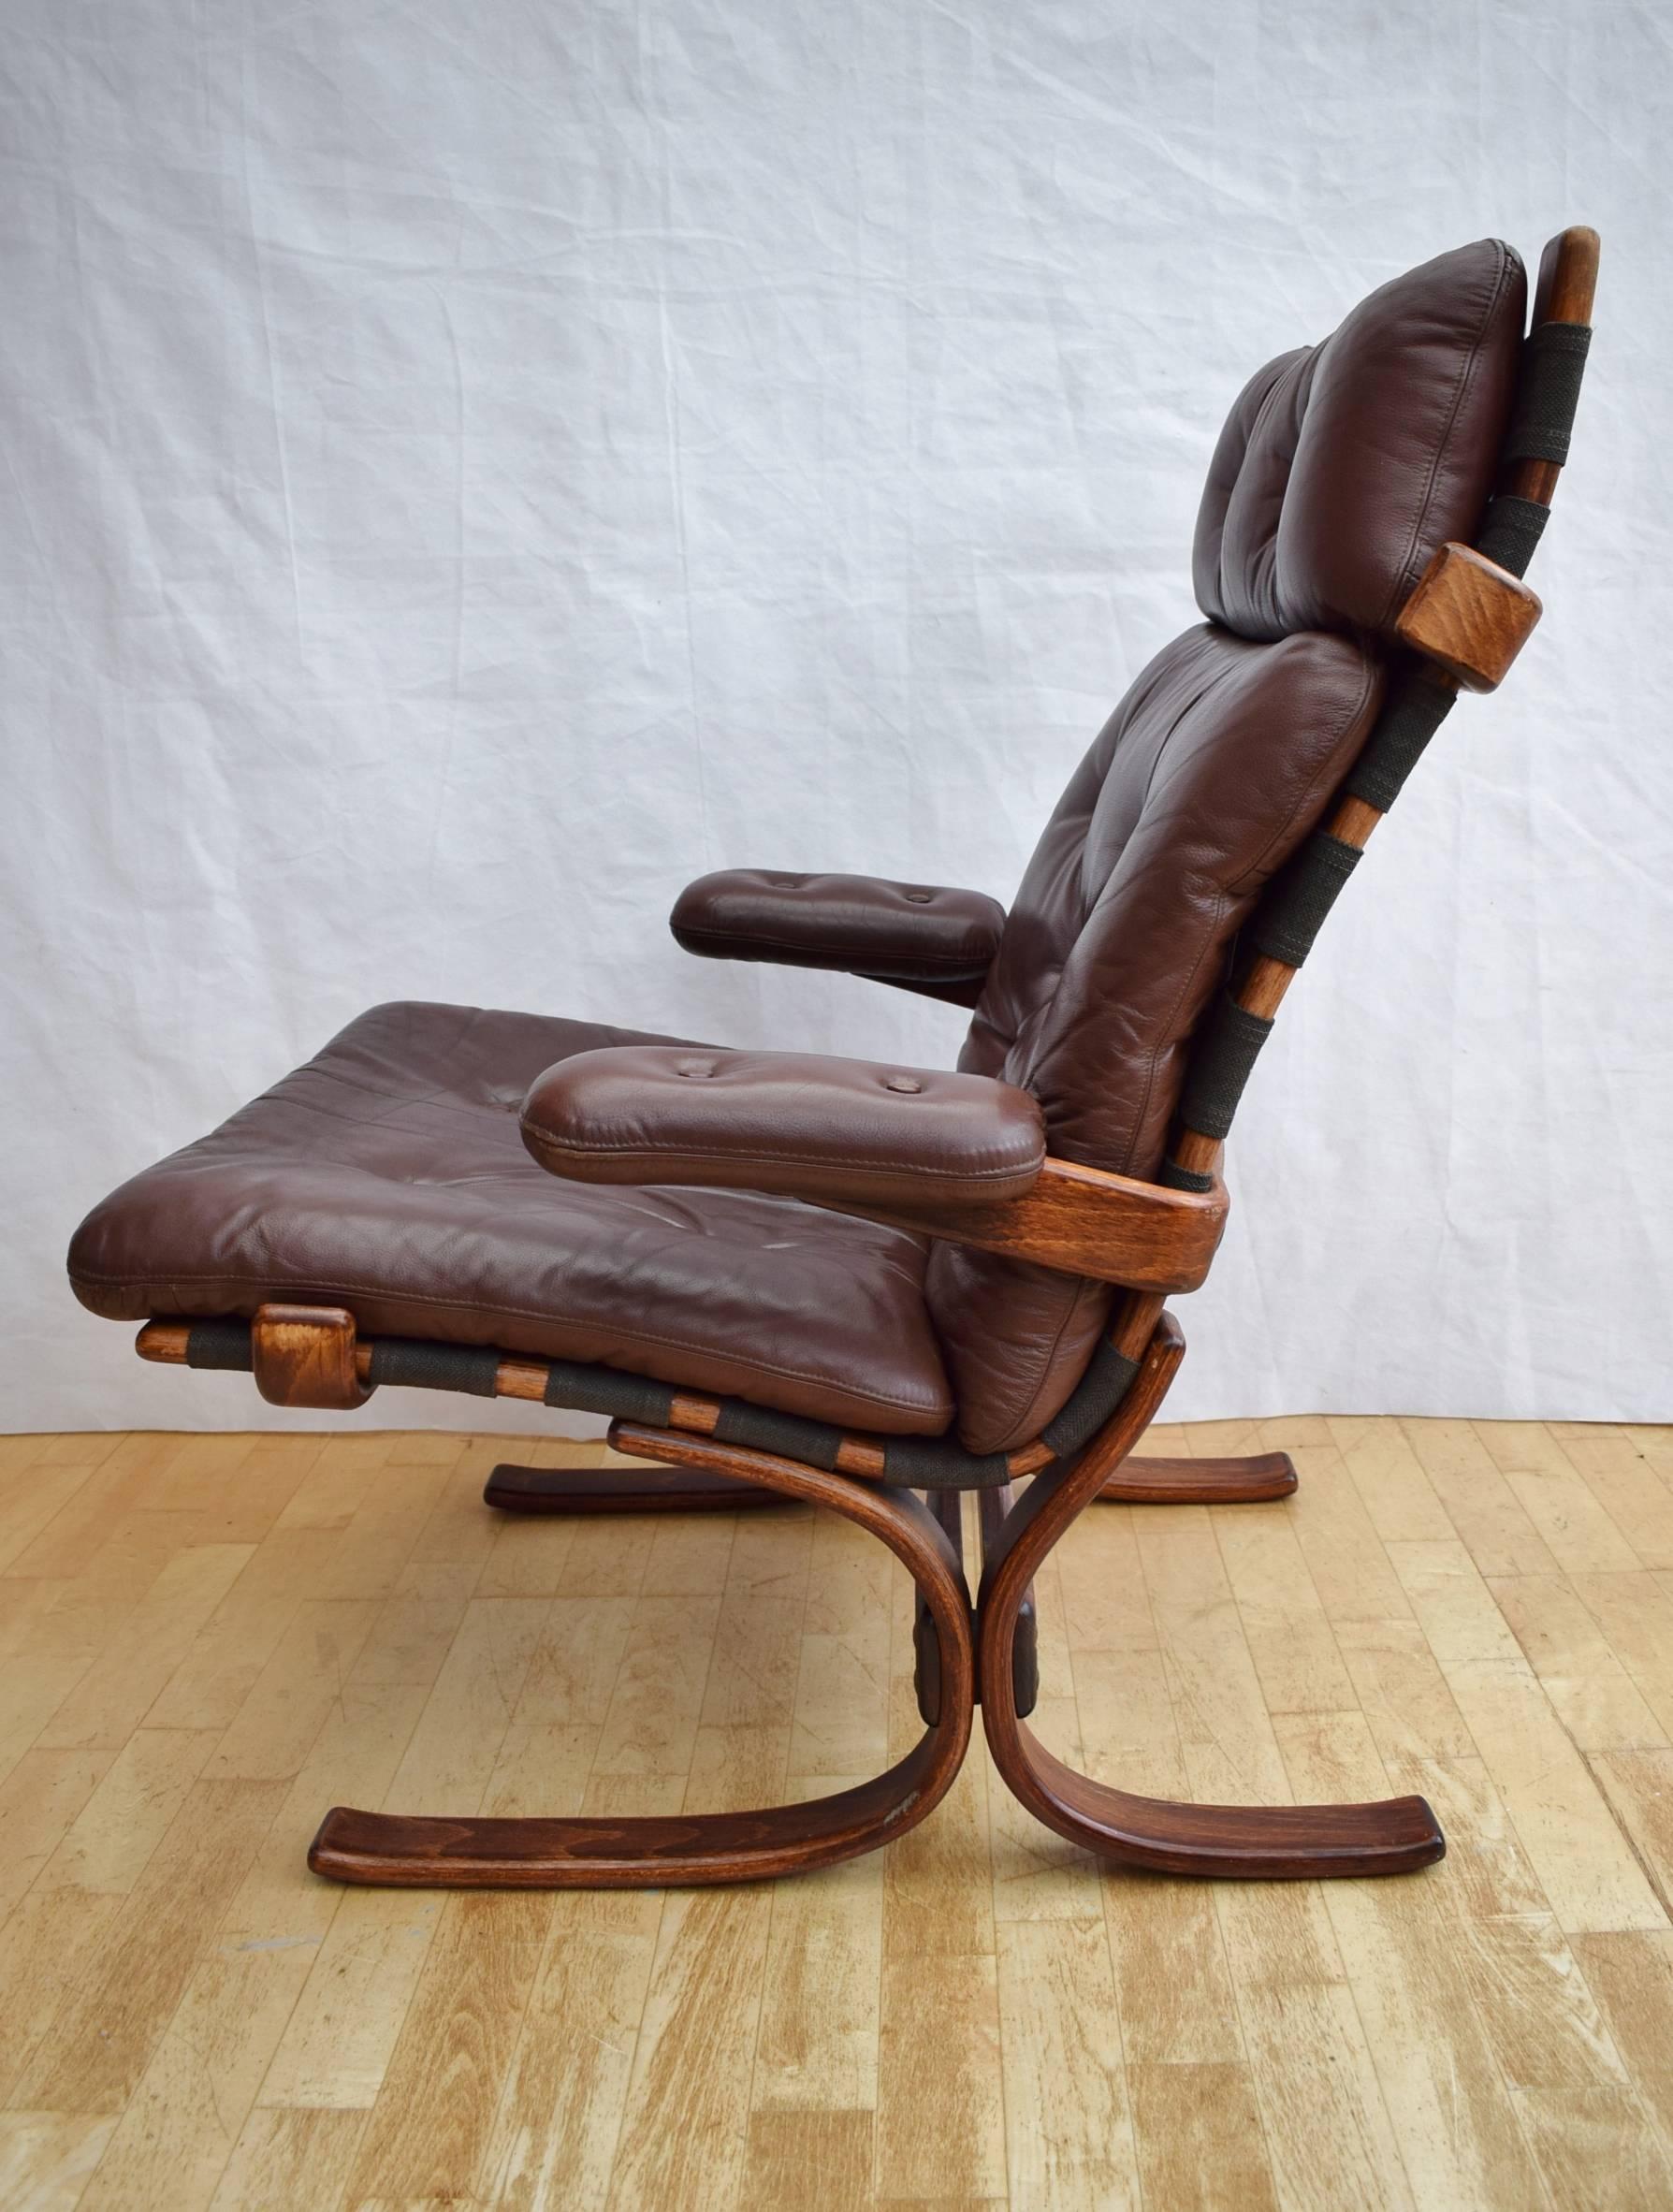 20th Century Mid-Century Retro Norwegian Westnofa Brown Leather Lounge Armchair, 1960s-1970s For Sale